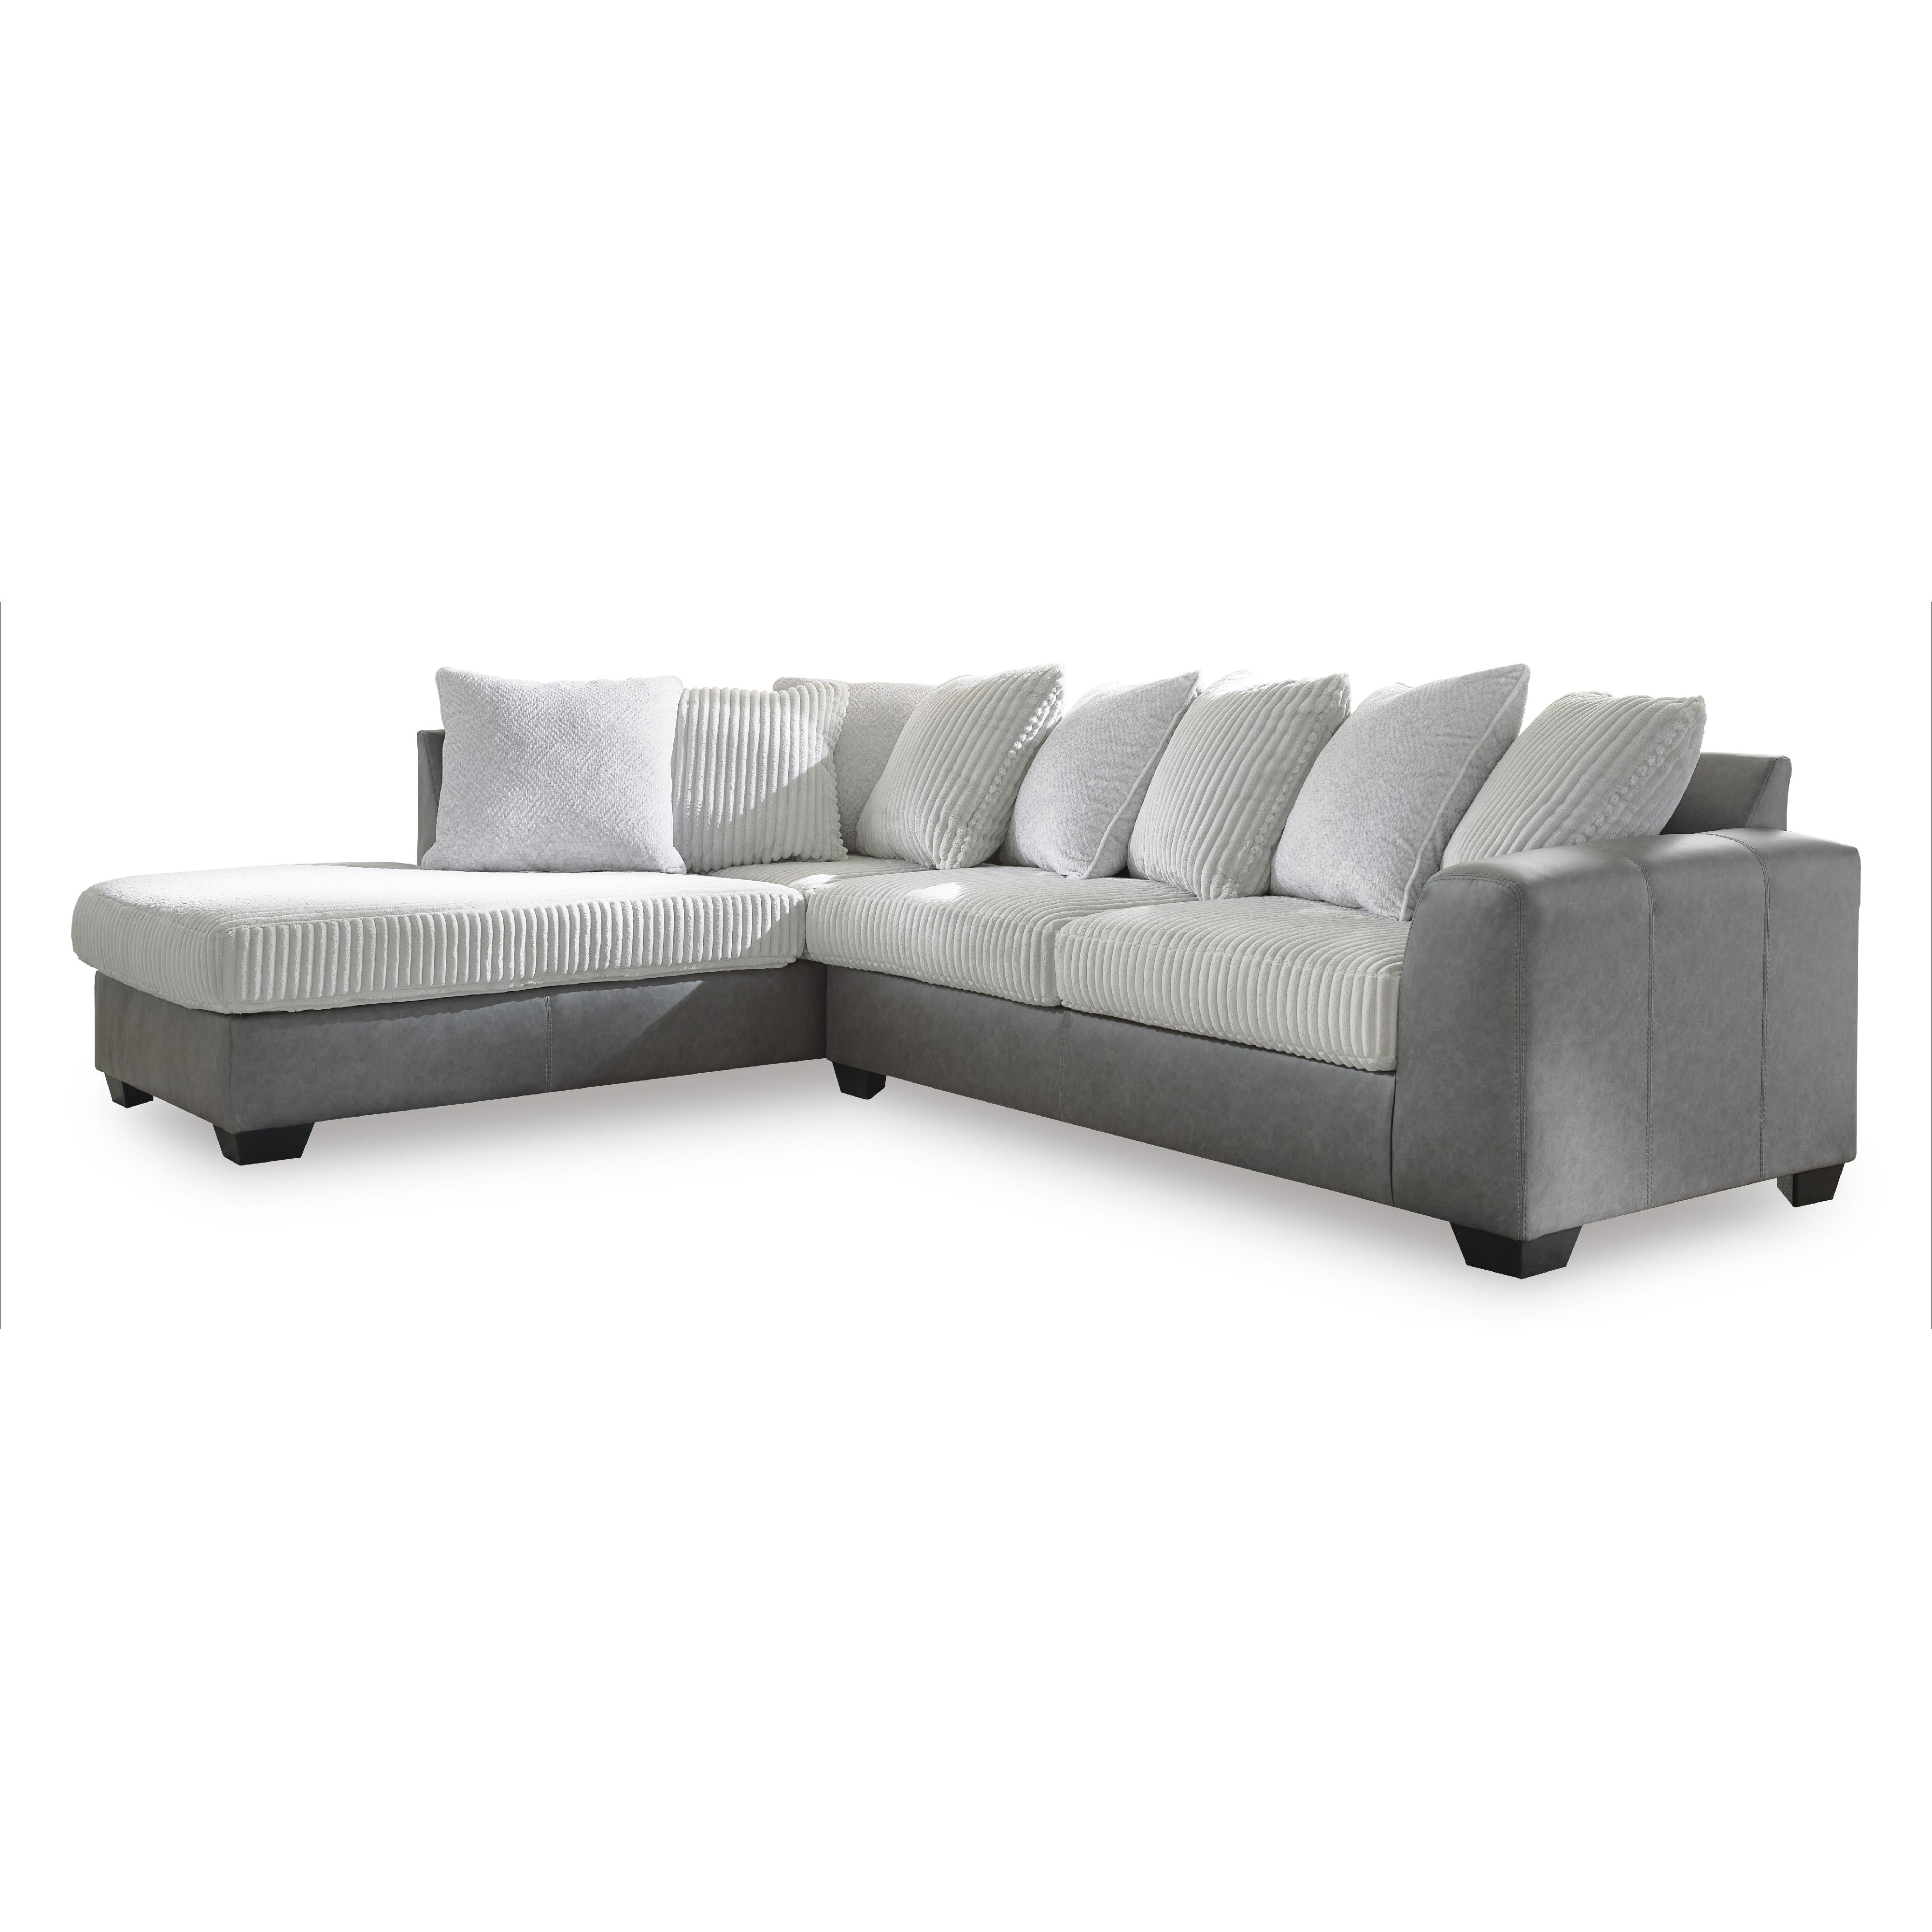 Benchcraft Clairette Court 2 pc Sectional 3150316/3150367 IMAGE 1